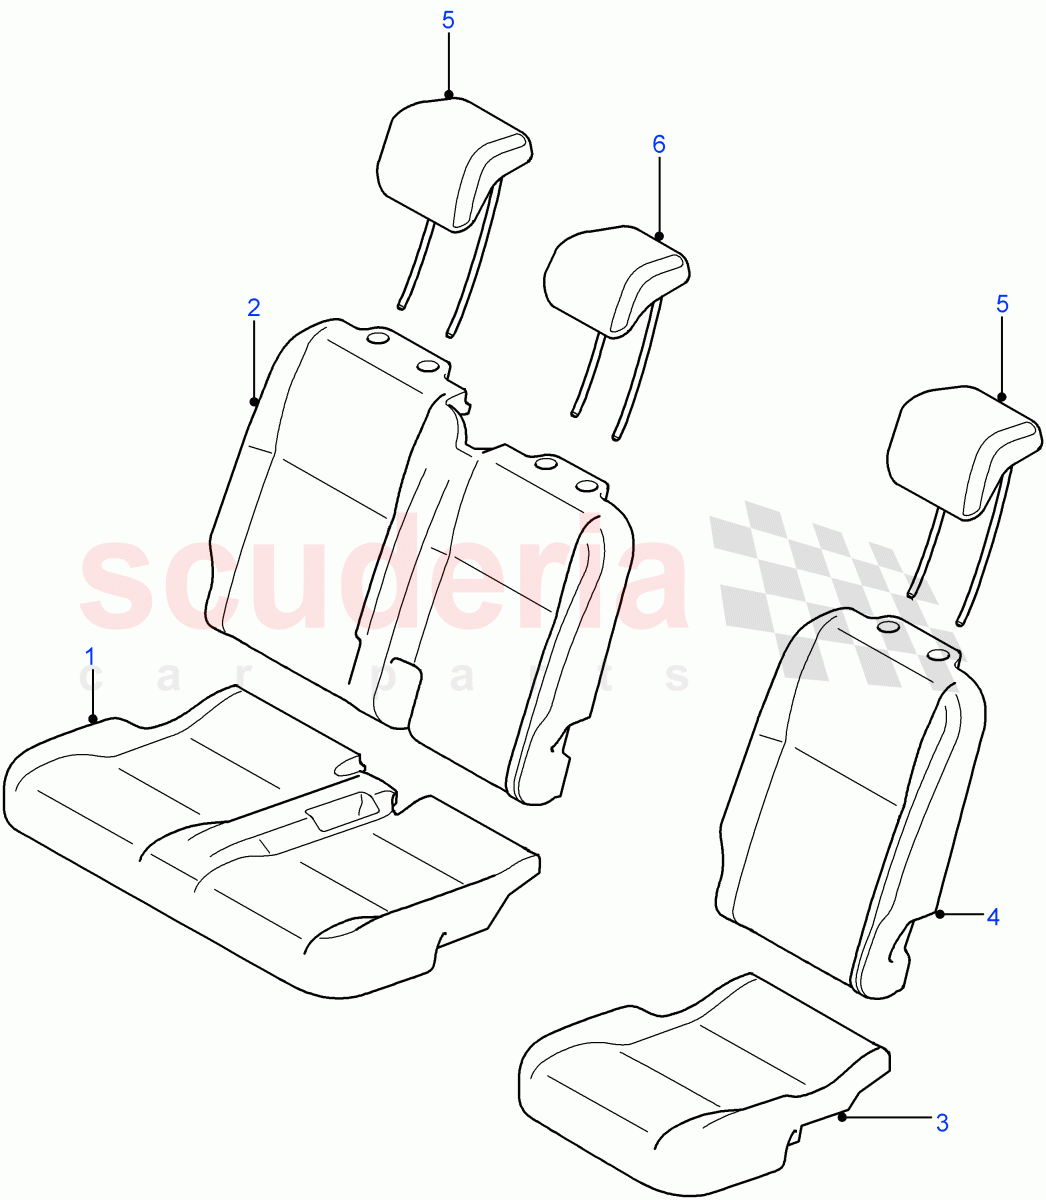 Rear Seat Covers(Station Wagon - 5 Door,110" Wheelbase) of Land Rover Land Rover Defender (2007-2016)